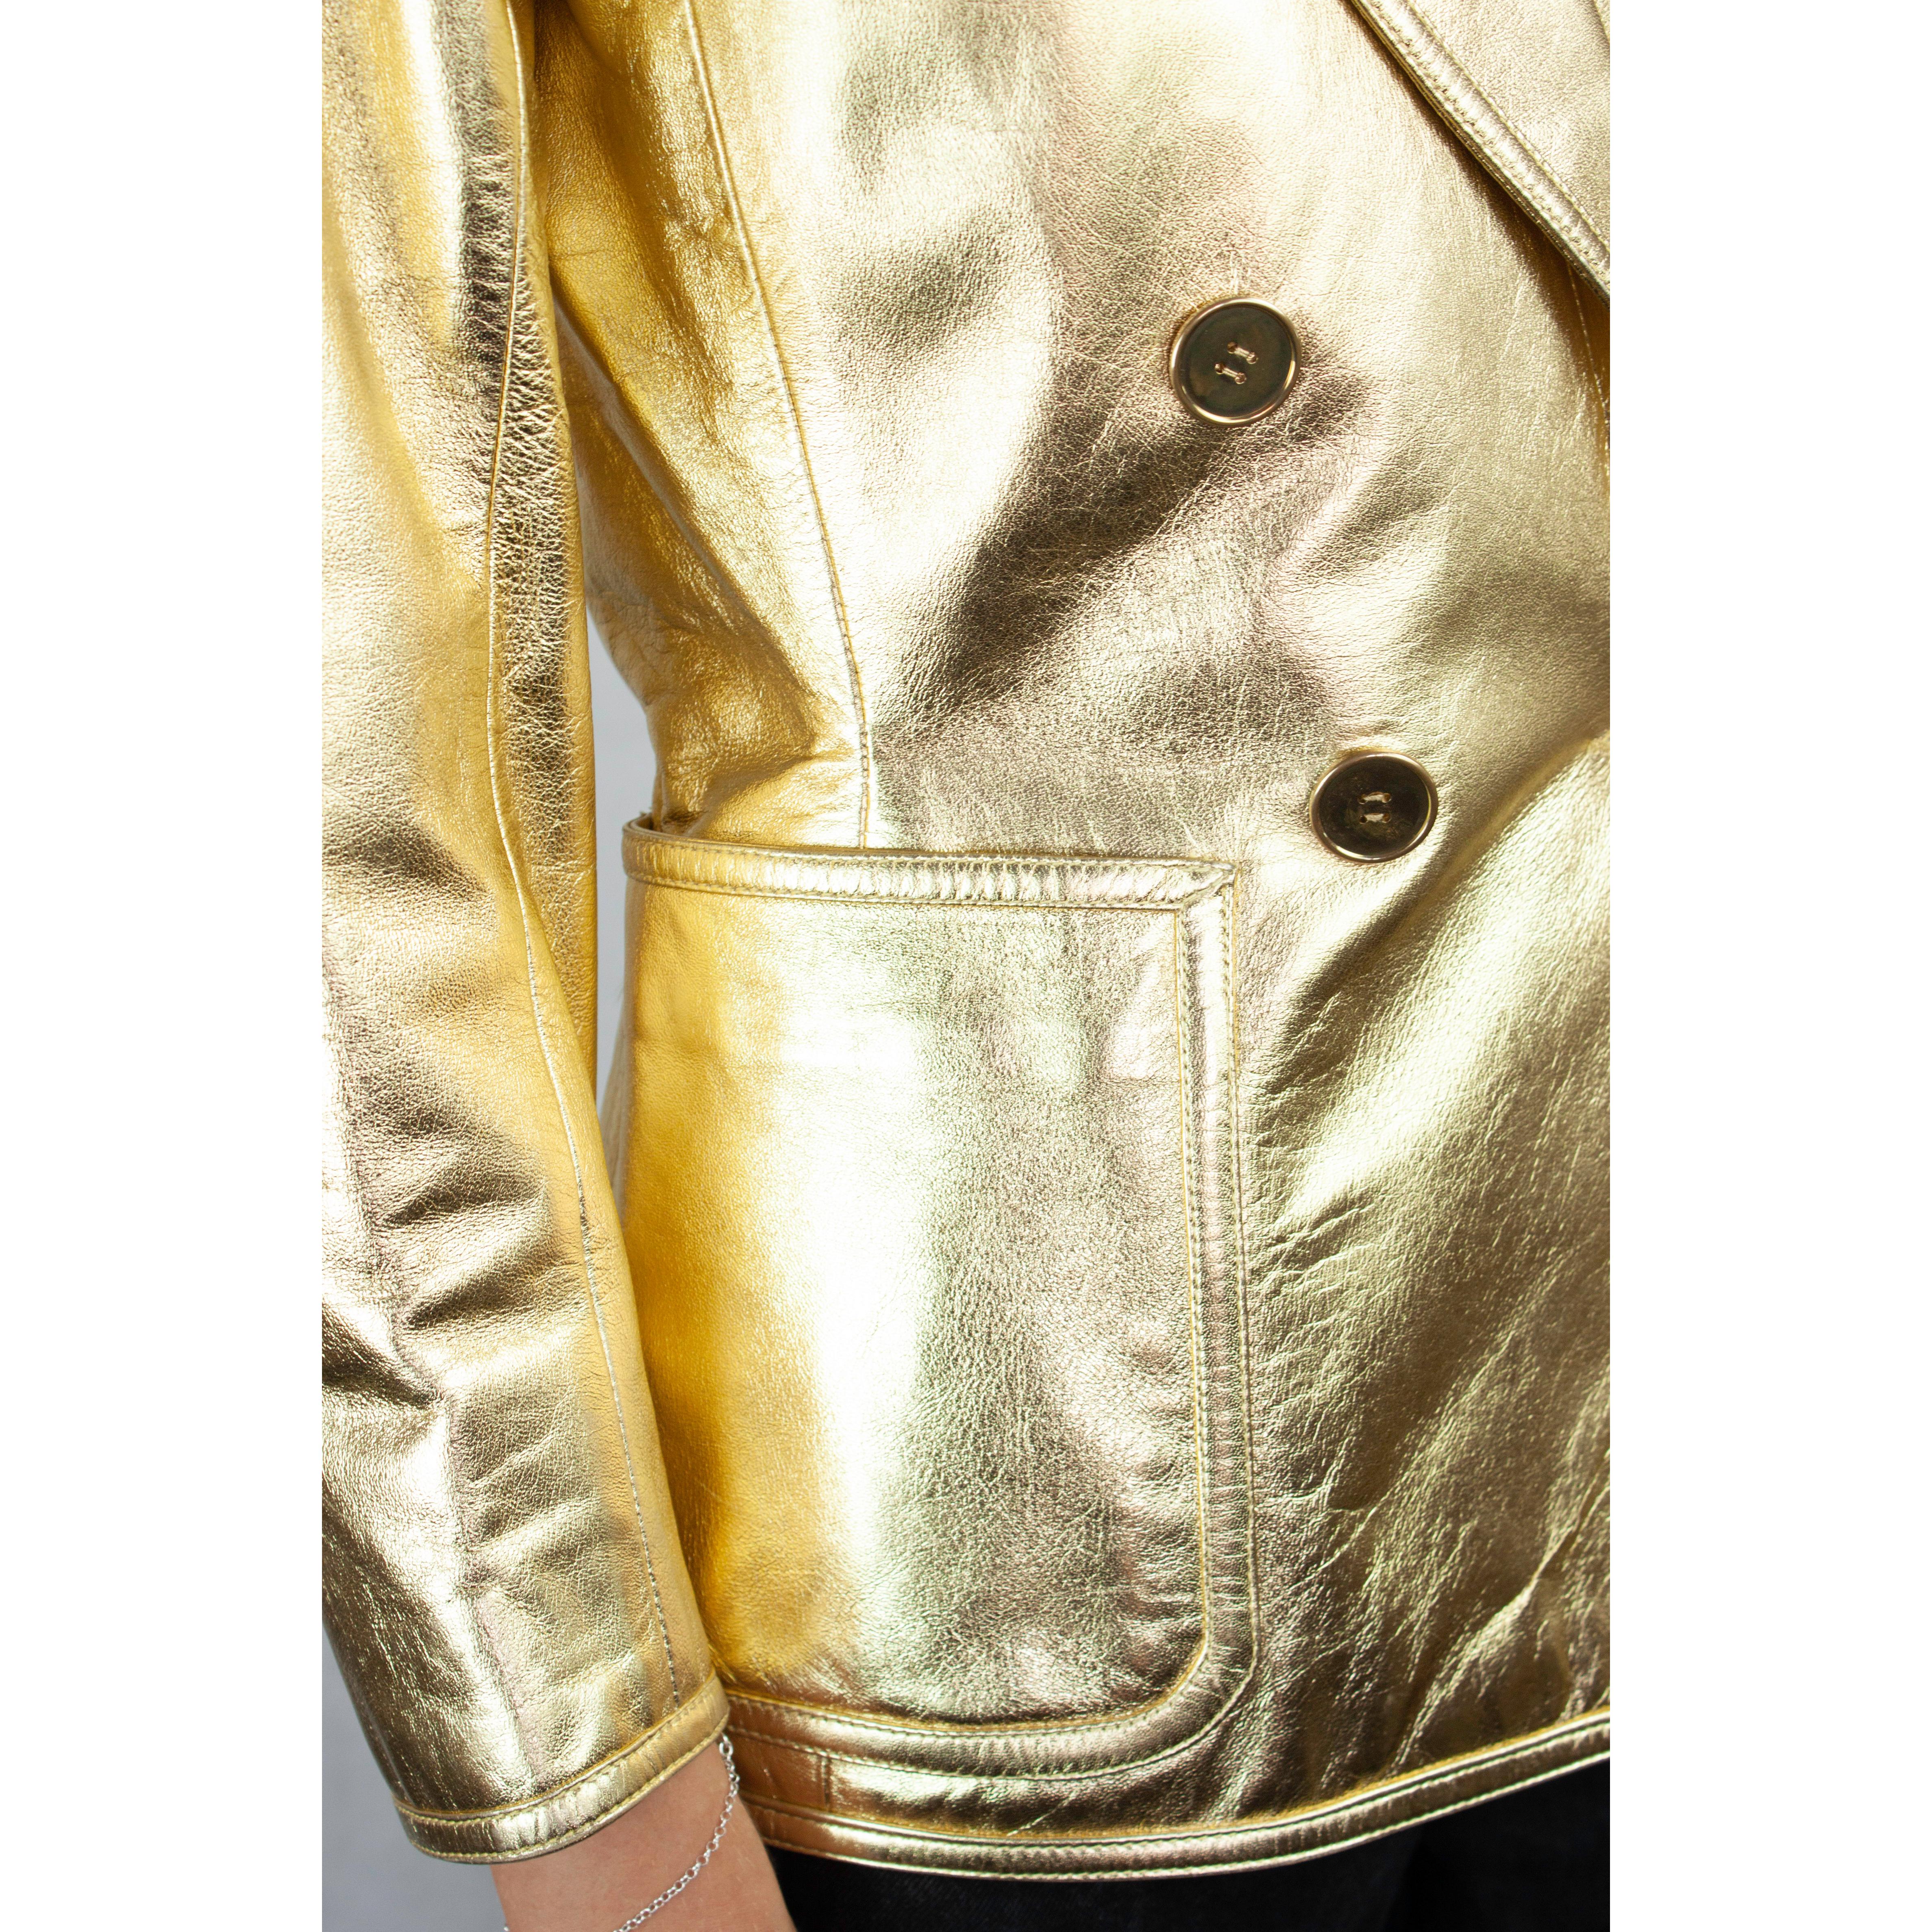 Women's Yves Saint Laurent documented  gold leather jacket. Circa 1970s